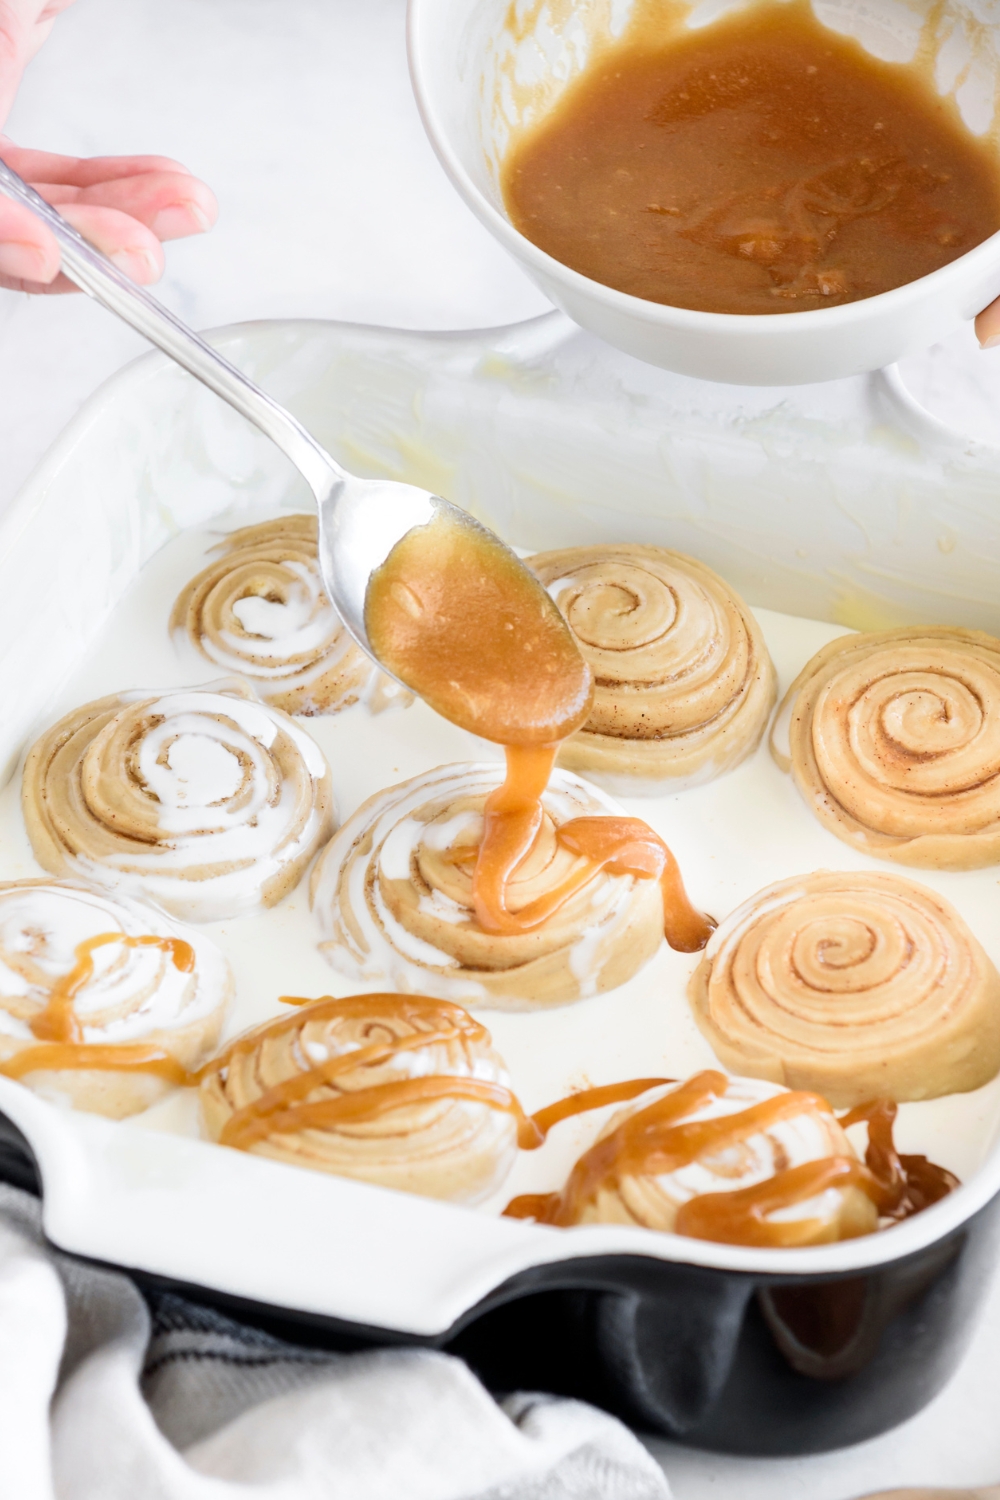 A spoon drizzling a brown sugar glaze onto cinnamon rolls in a baking dish that are covered with cream.